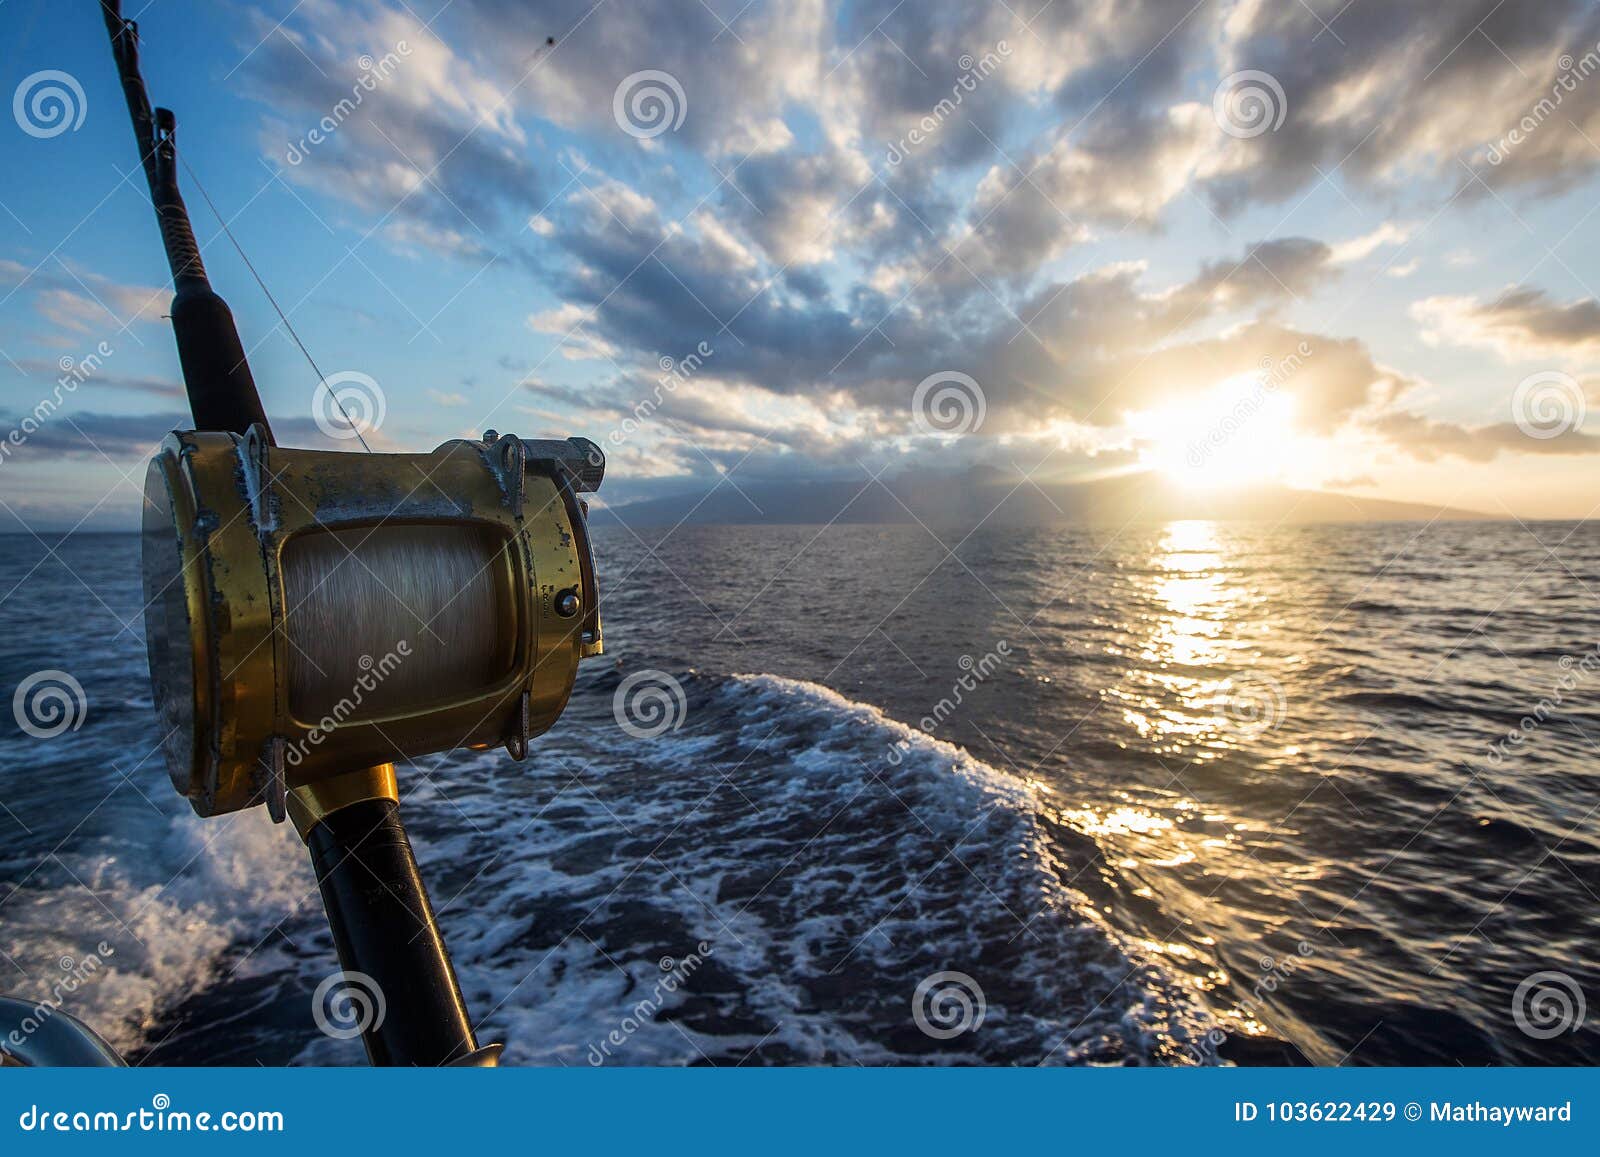 Deep Sea Fishing Reel on a Boat during Sunrise Stock Image - Image of  active, activity: 103622429